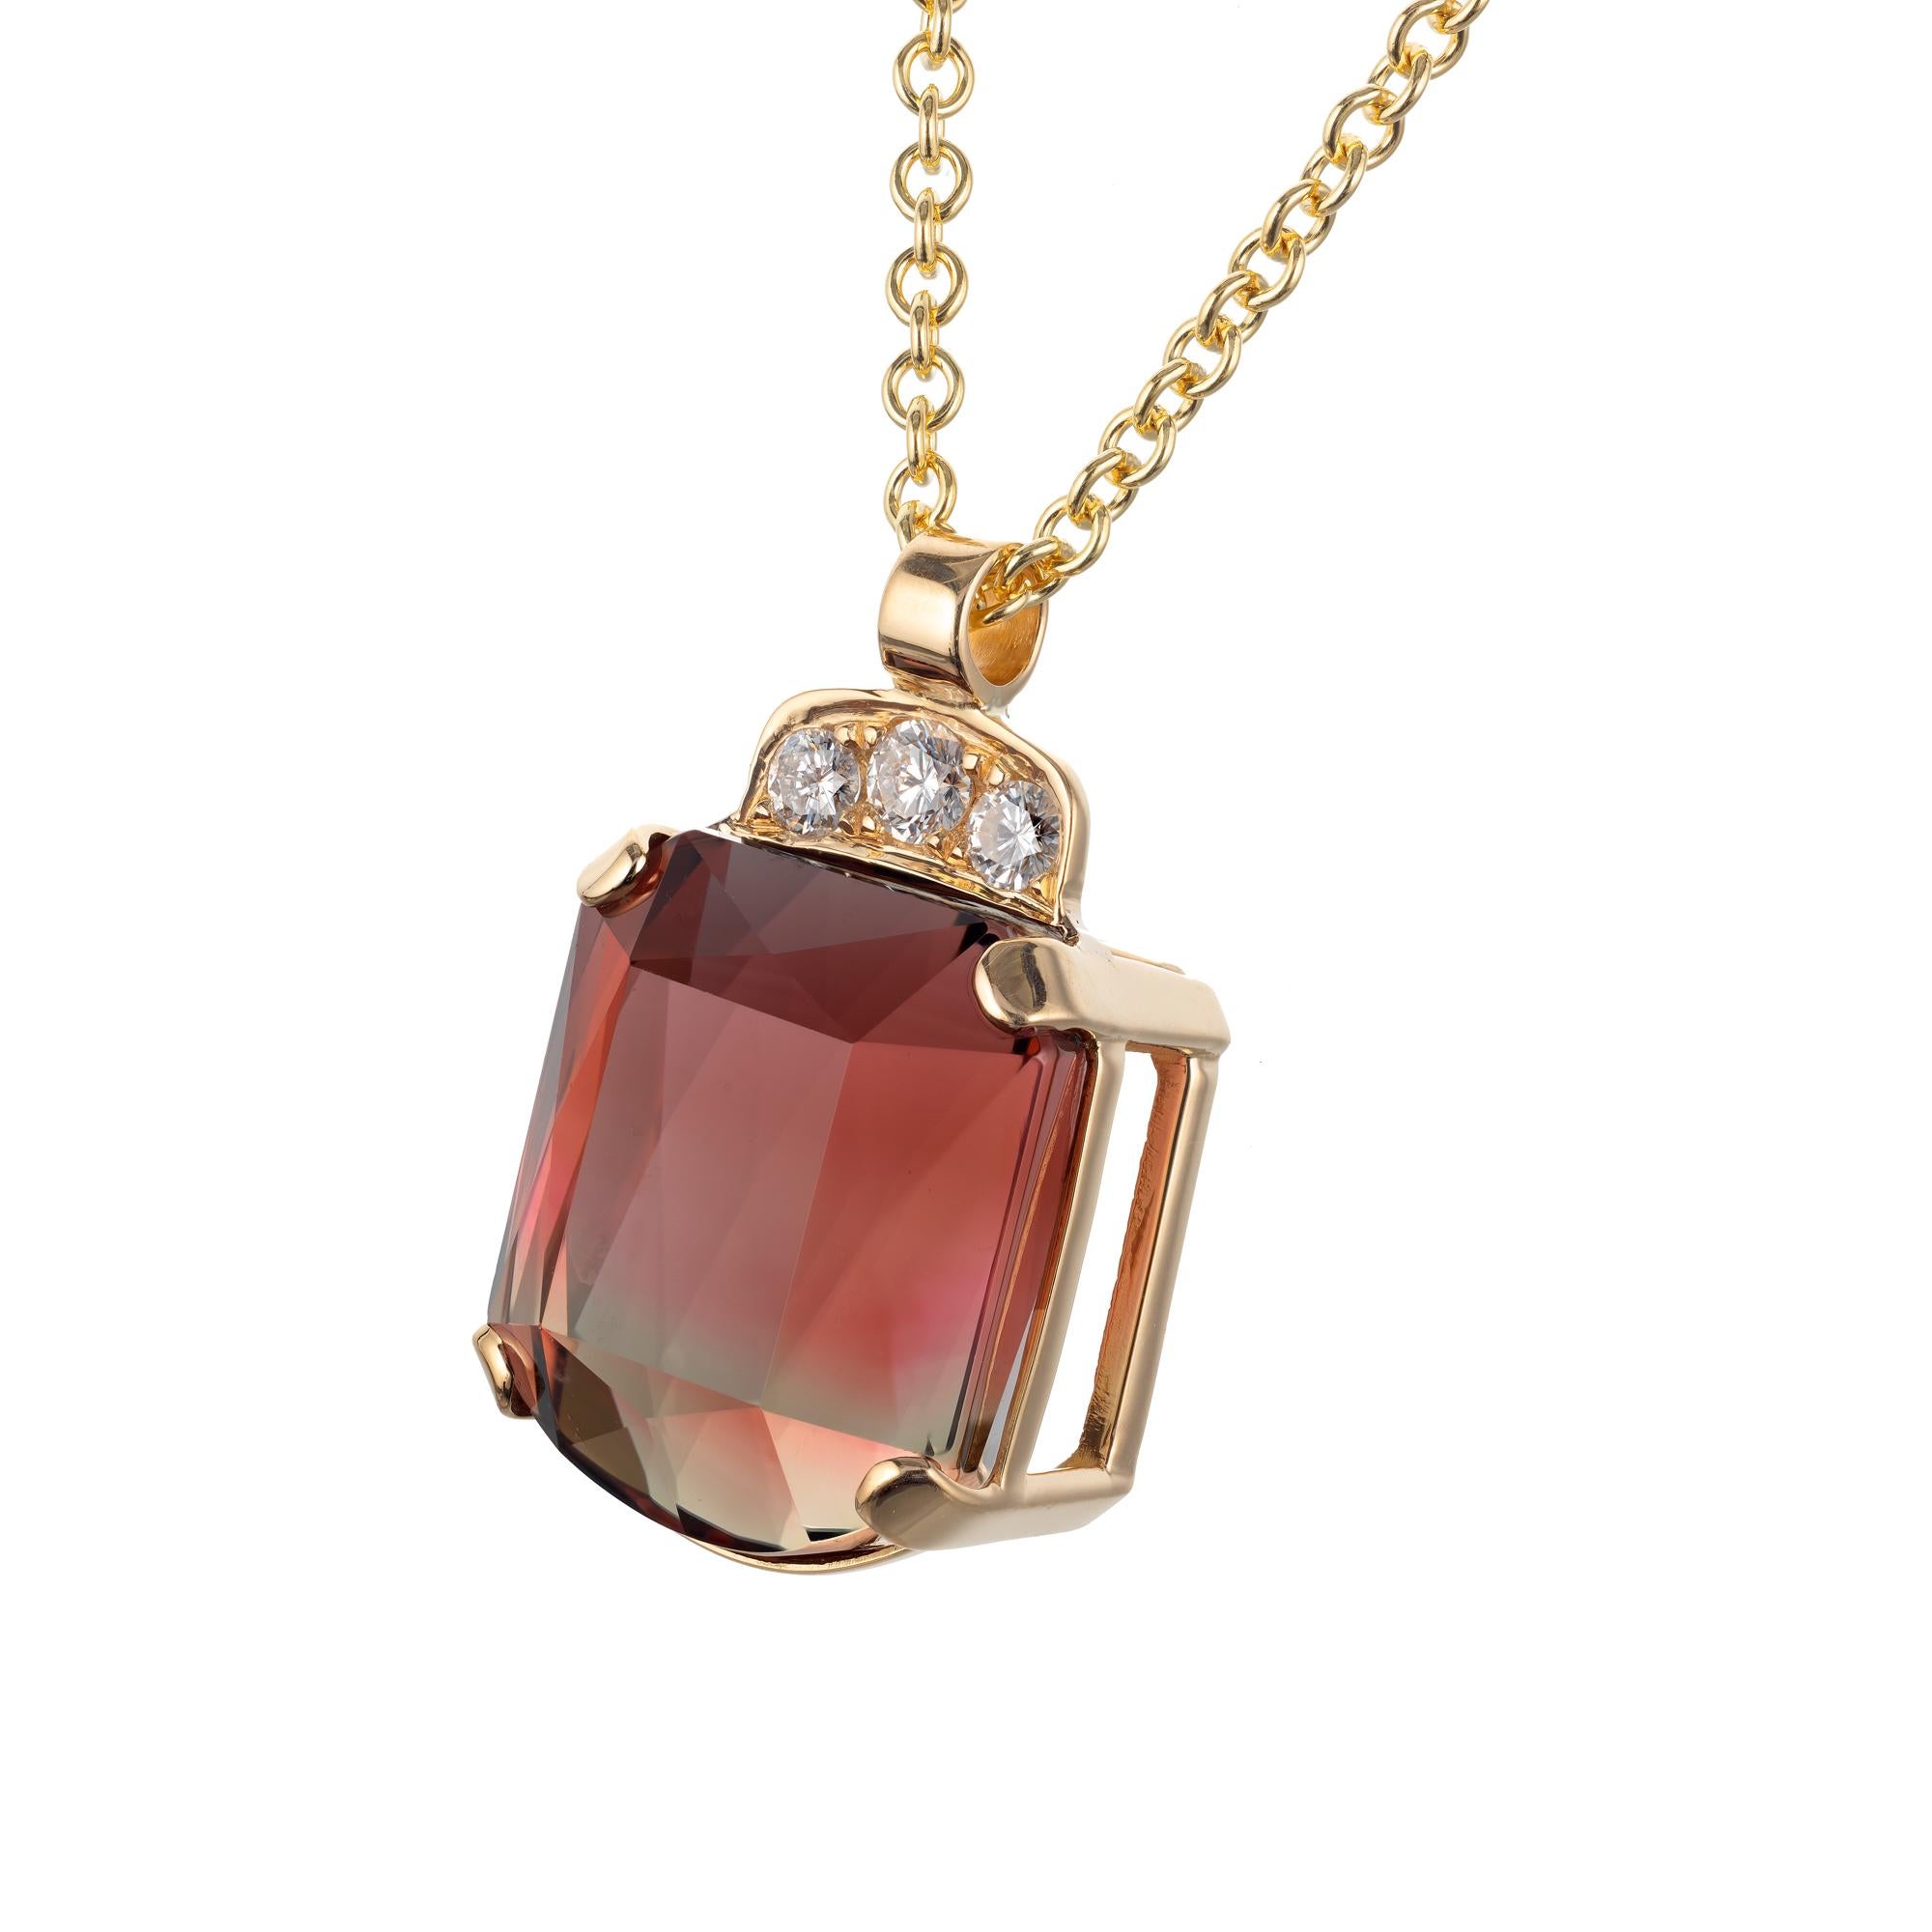 24.39 carat custom cut pink tourmaline and diamond pendant necklace. 18k yellow gold pendant setting with a tourmaline center stone with diamond accents. Created in the Peter Suchy workshop.

1 shield cut brownish pink tourmaline, Approximate